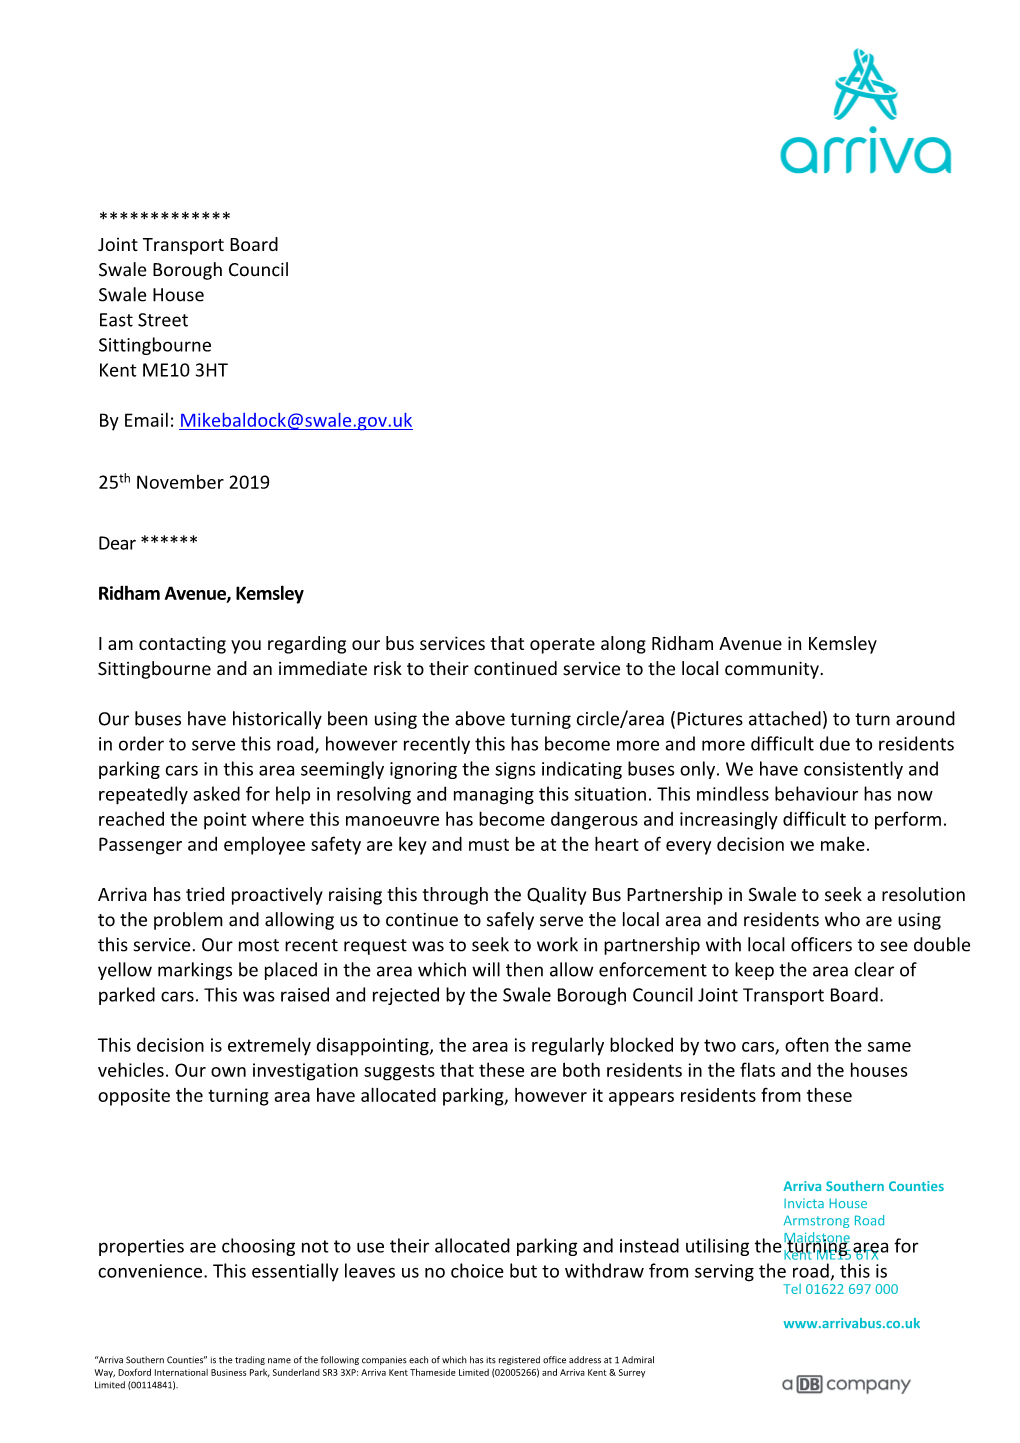 Letter from Arriva